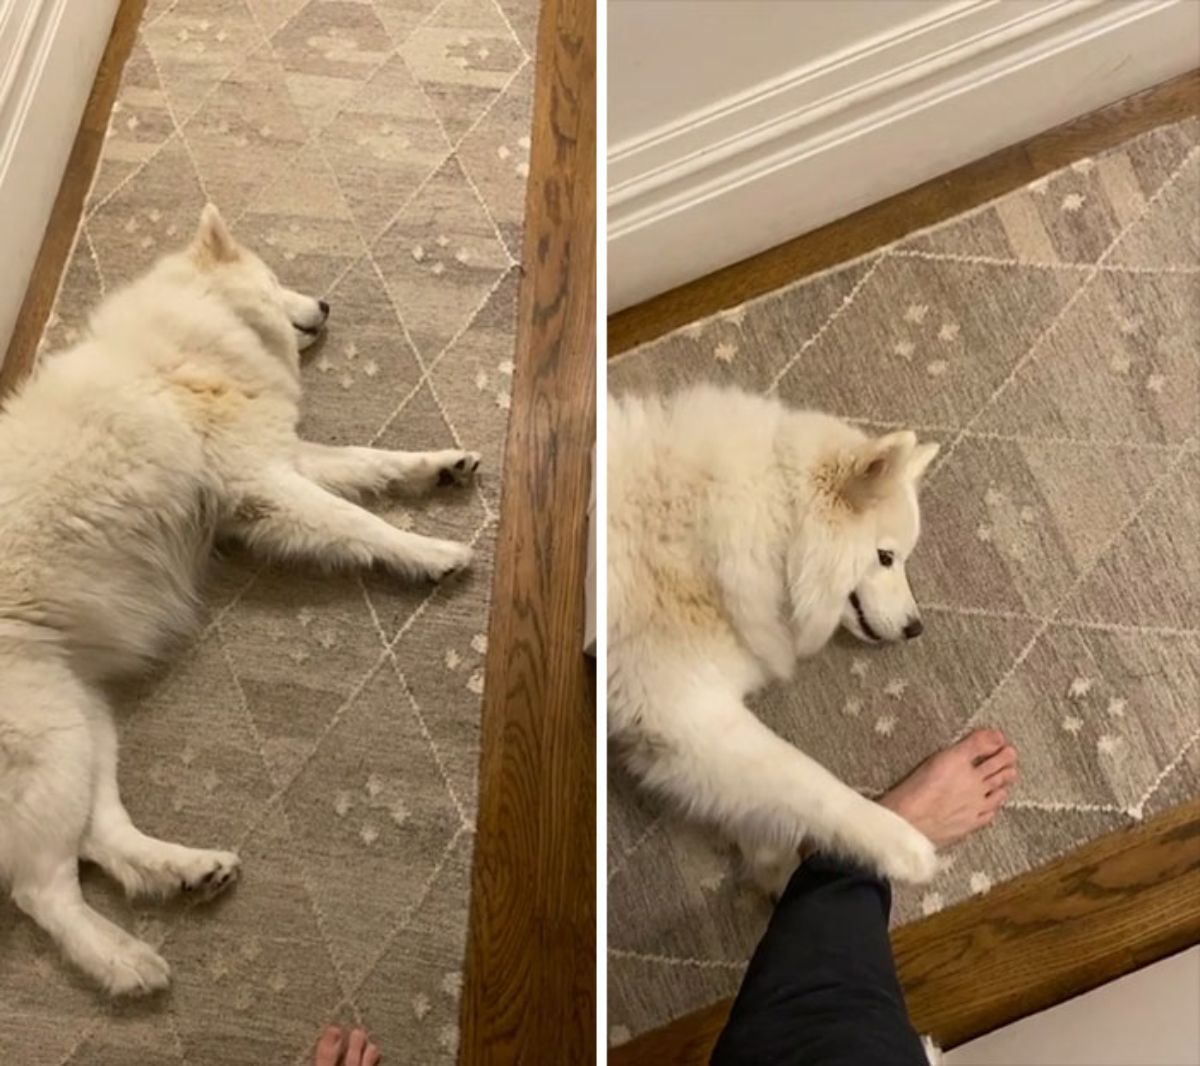 2 photos of a white fluffy samoyed laying on the floor of a hallway and placing a paw on someone's foot in the second photo